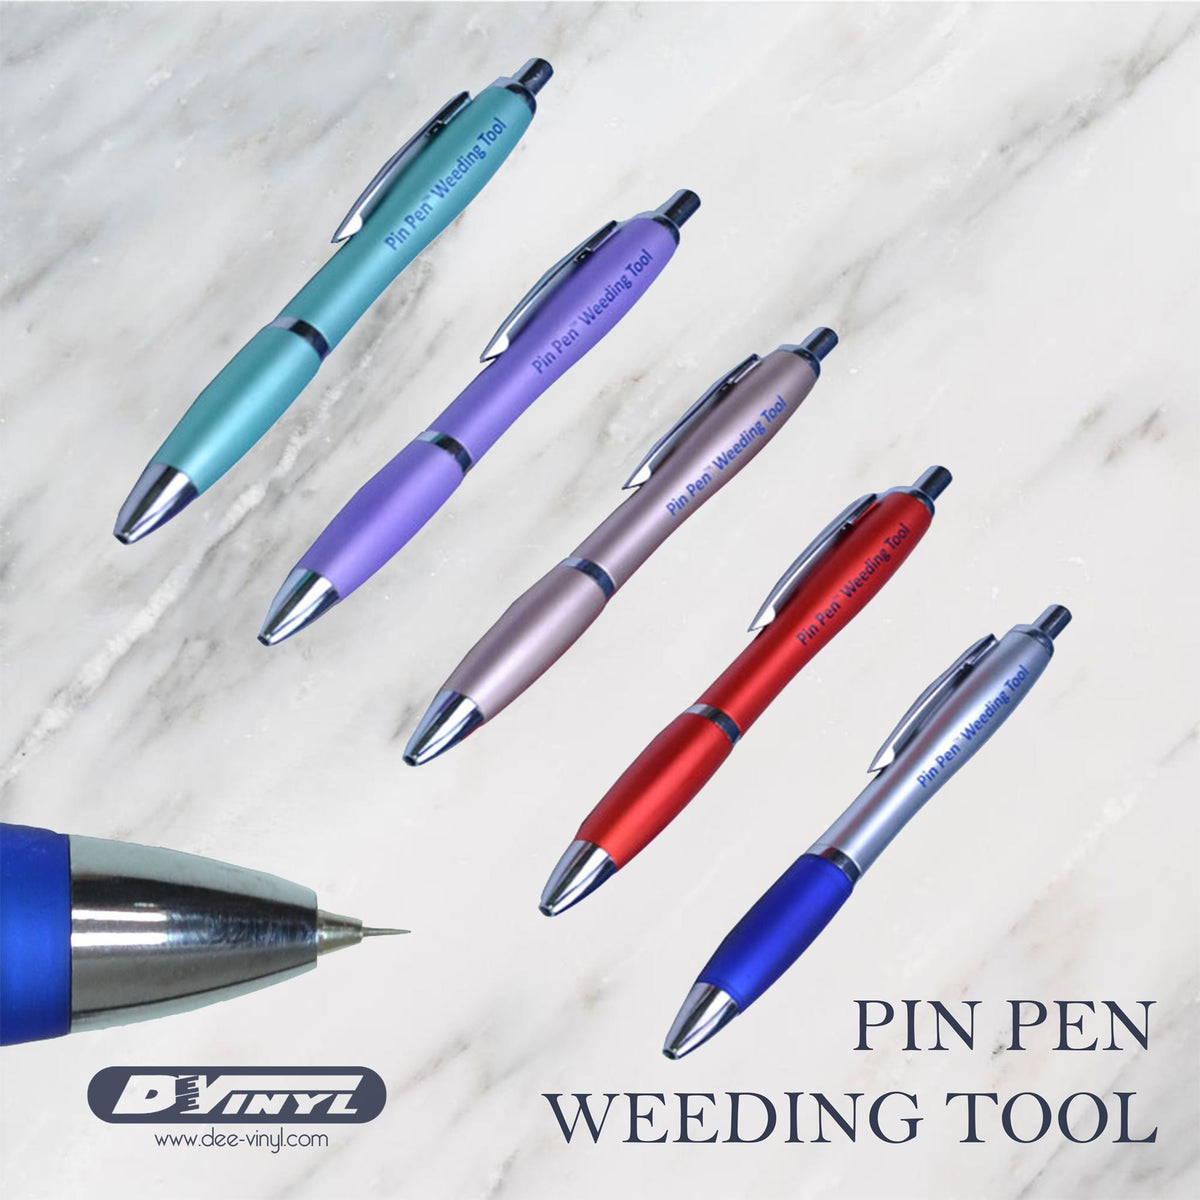 3 Piece Craft Weeding Tool for Adhesive Vinyl Precision Weeding Pin Pen for  Vinyl Pen Weeder Air Release Car Puncturing Installation PinPen Tool  Stainless Steel Point (Green Blue Purple)